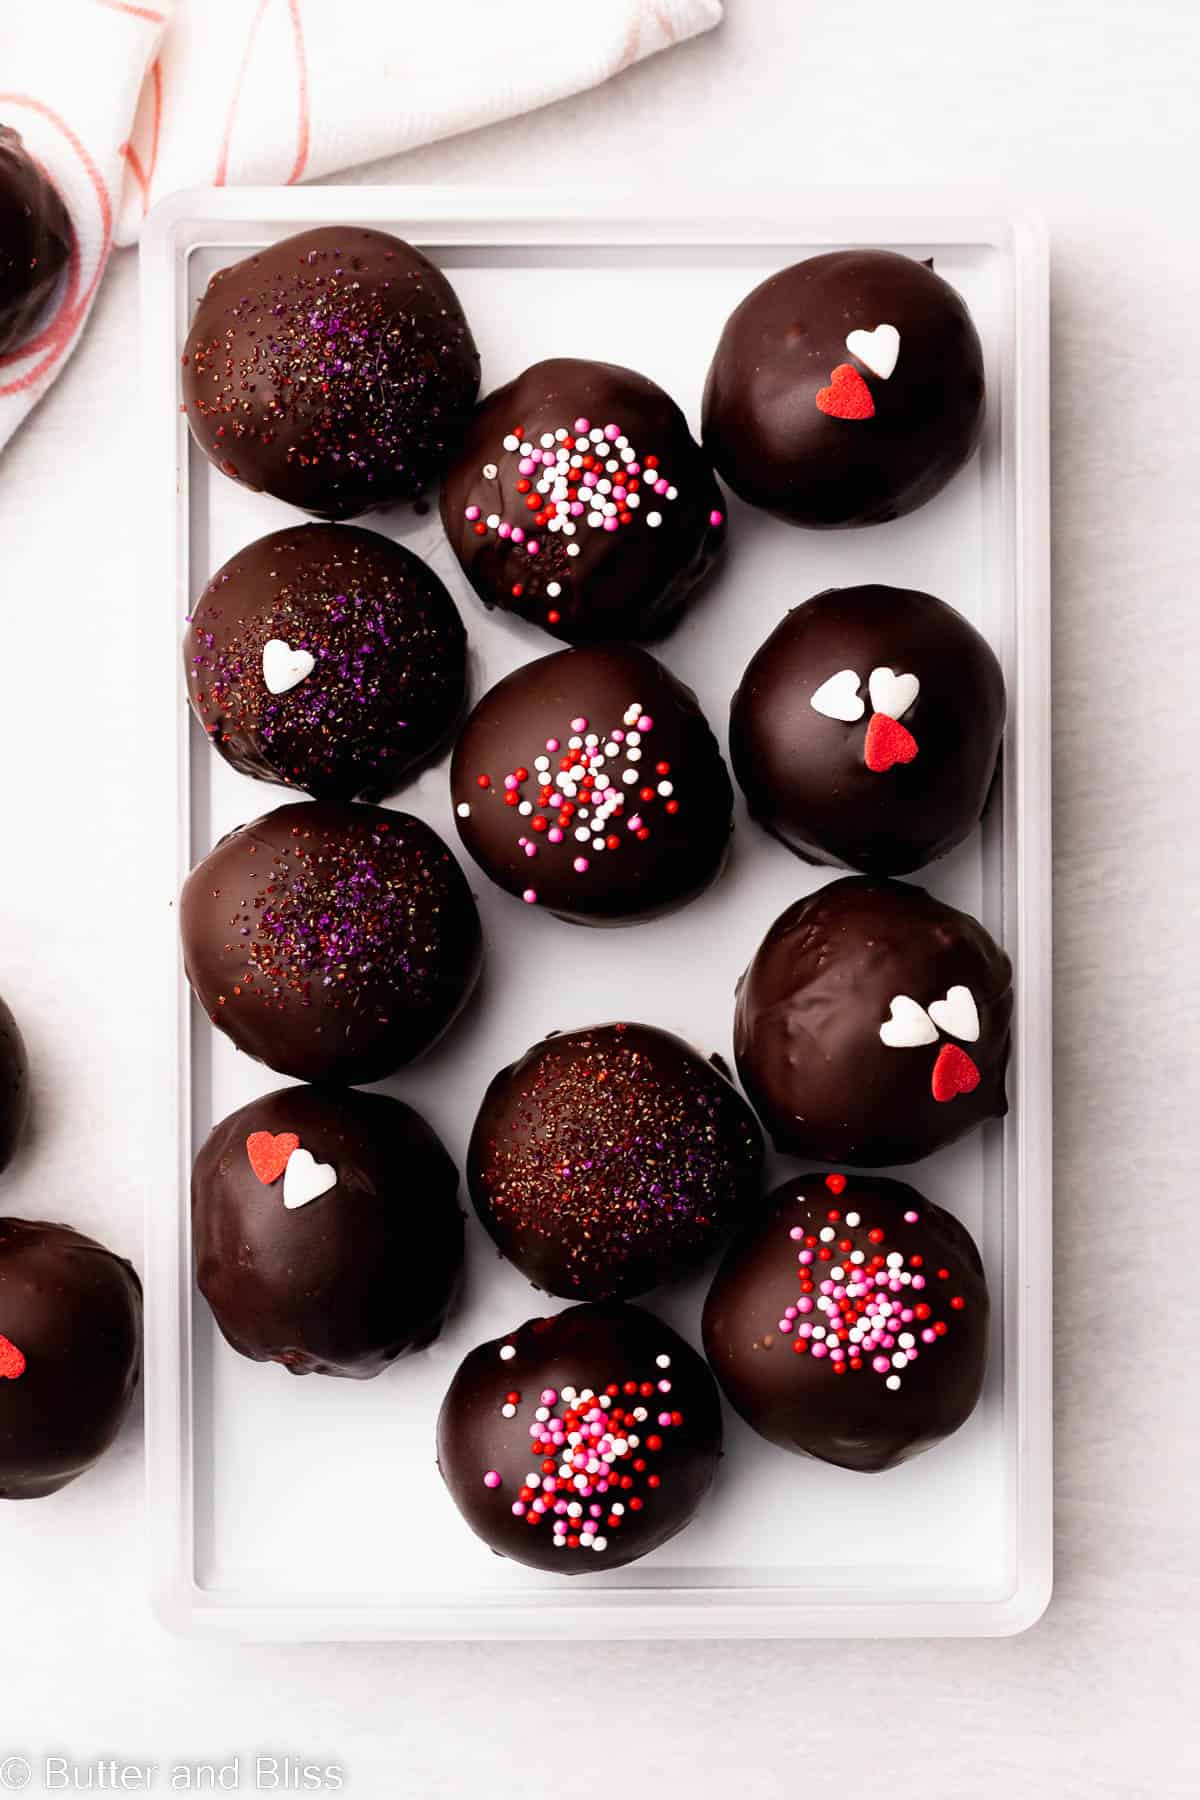 Gluten free cake truffles covered in chocolate and sprinkles arranged in a white tray.